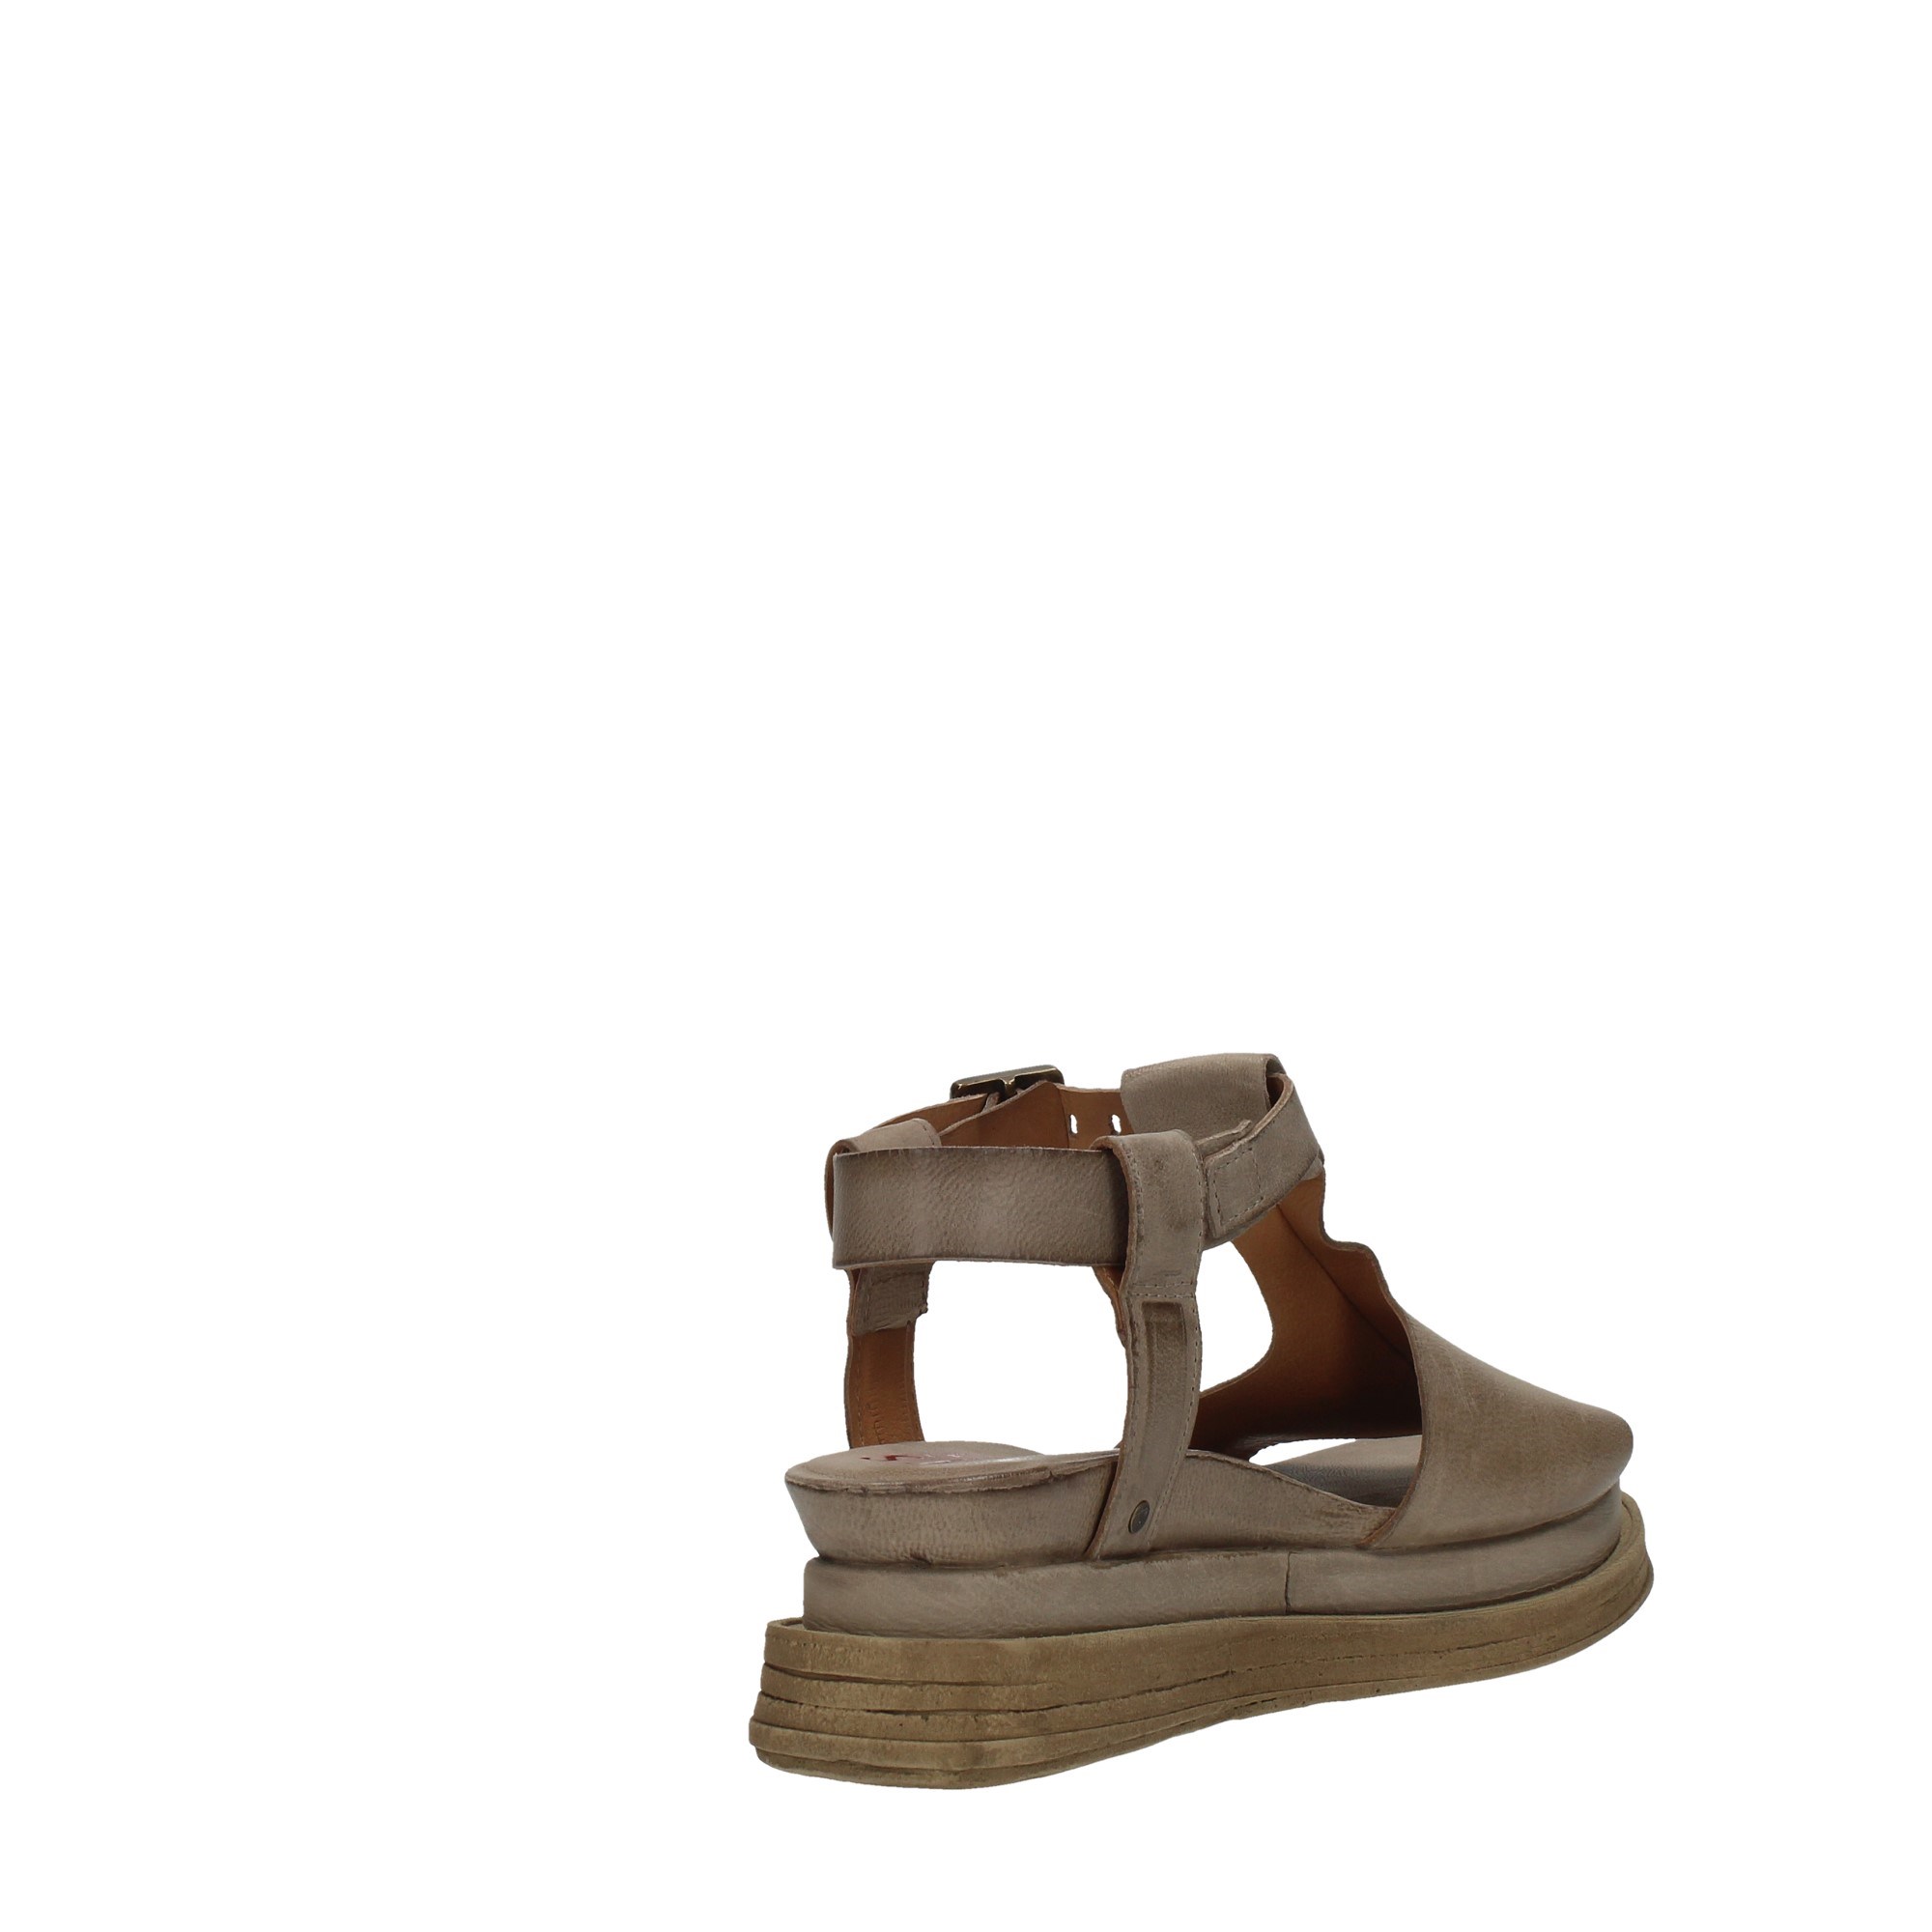 As98 Shoes Women Wedge Sandals A15029